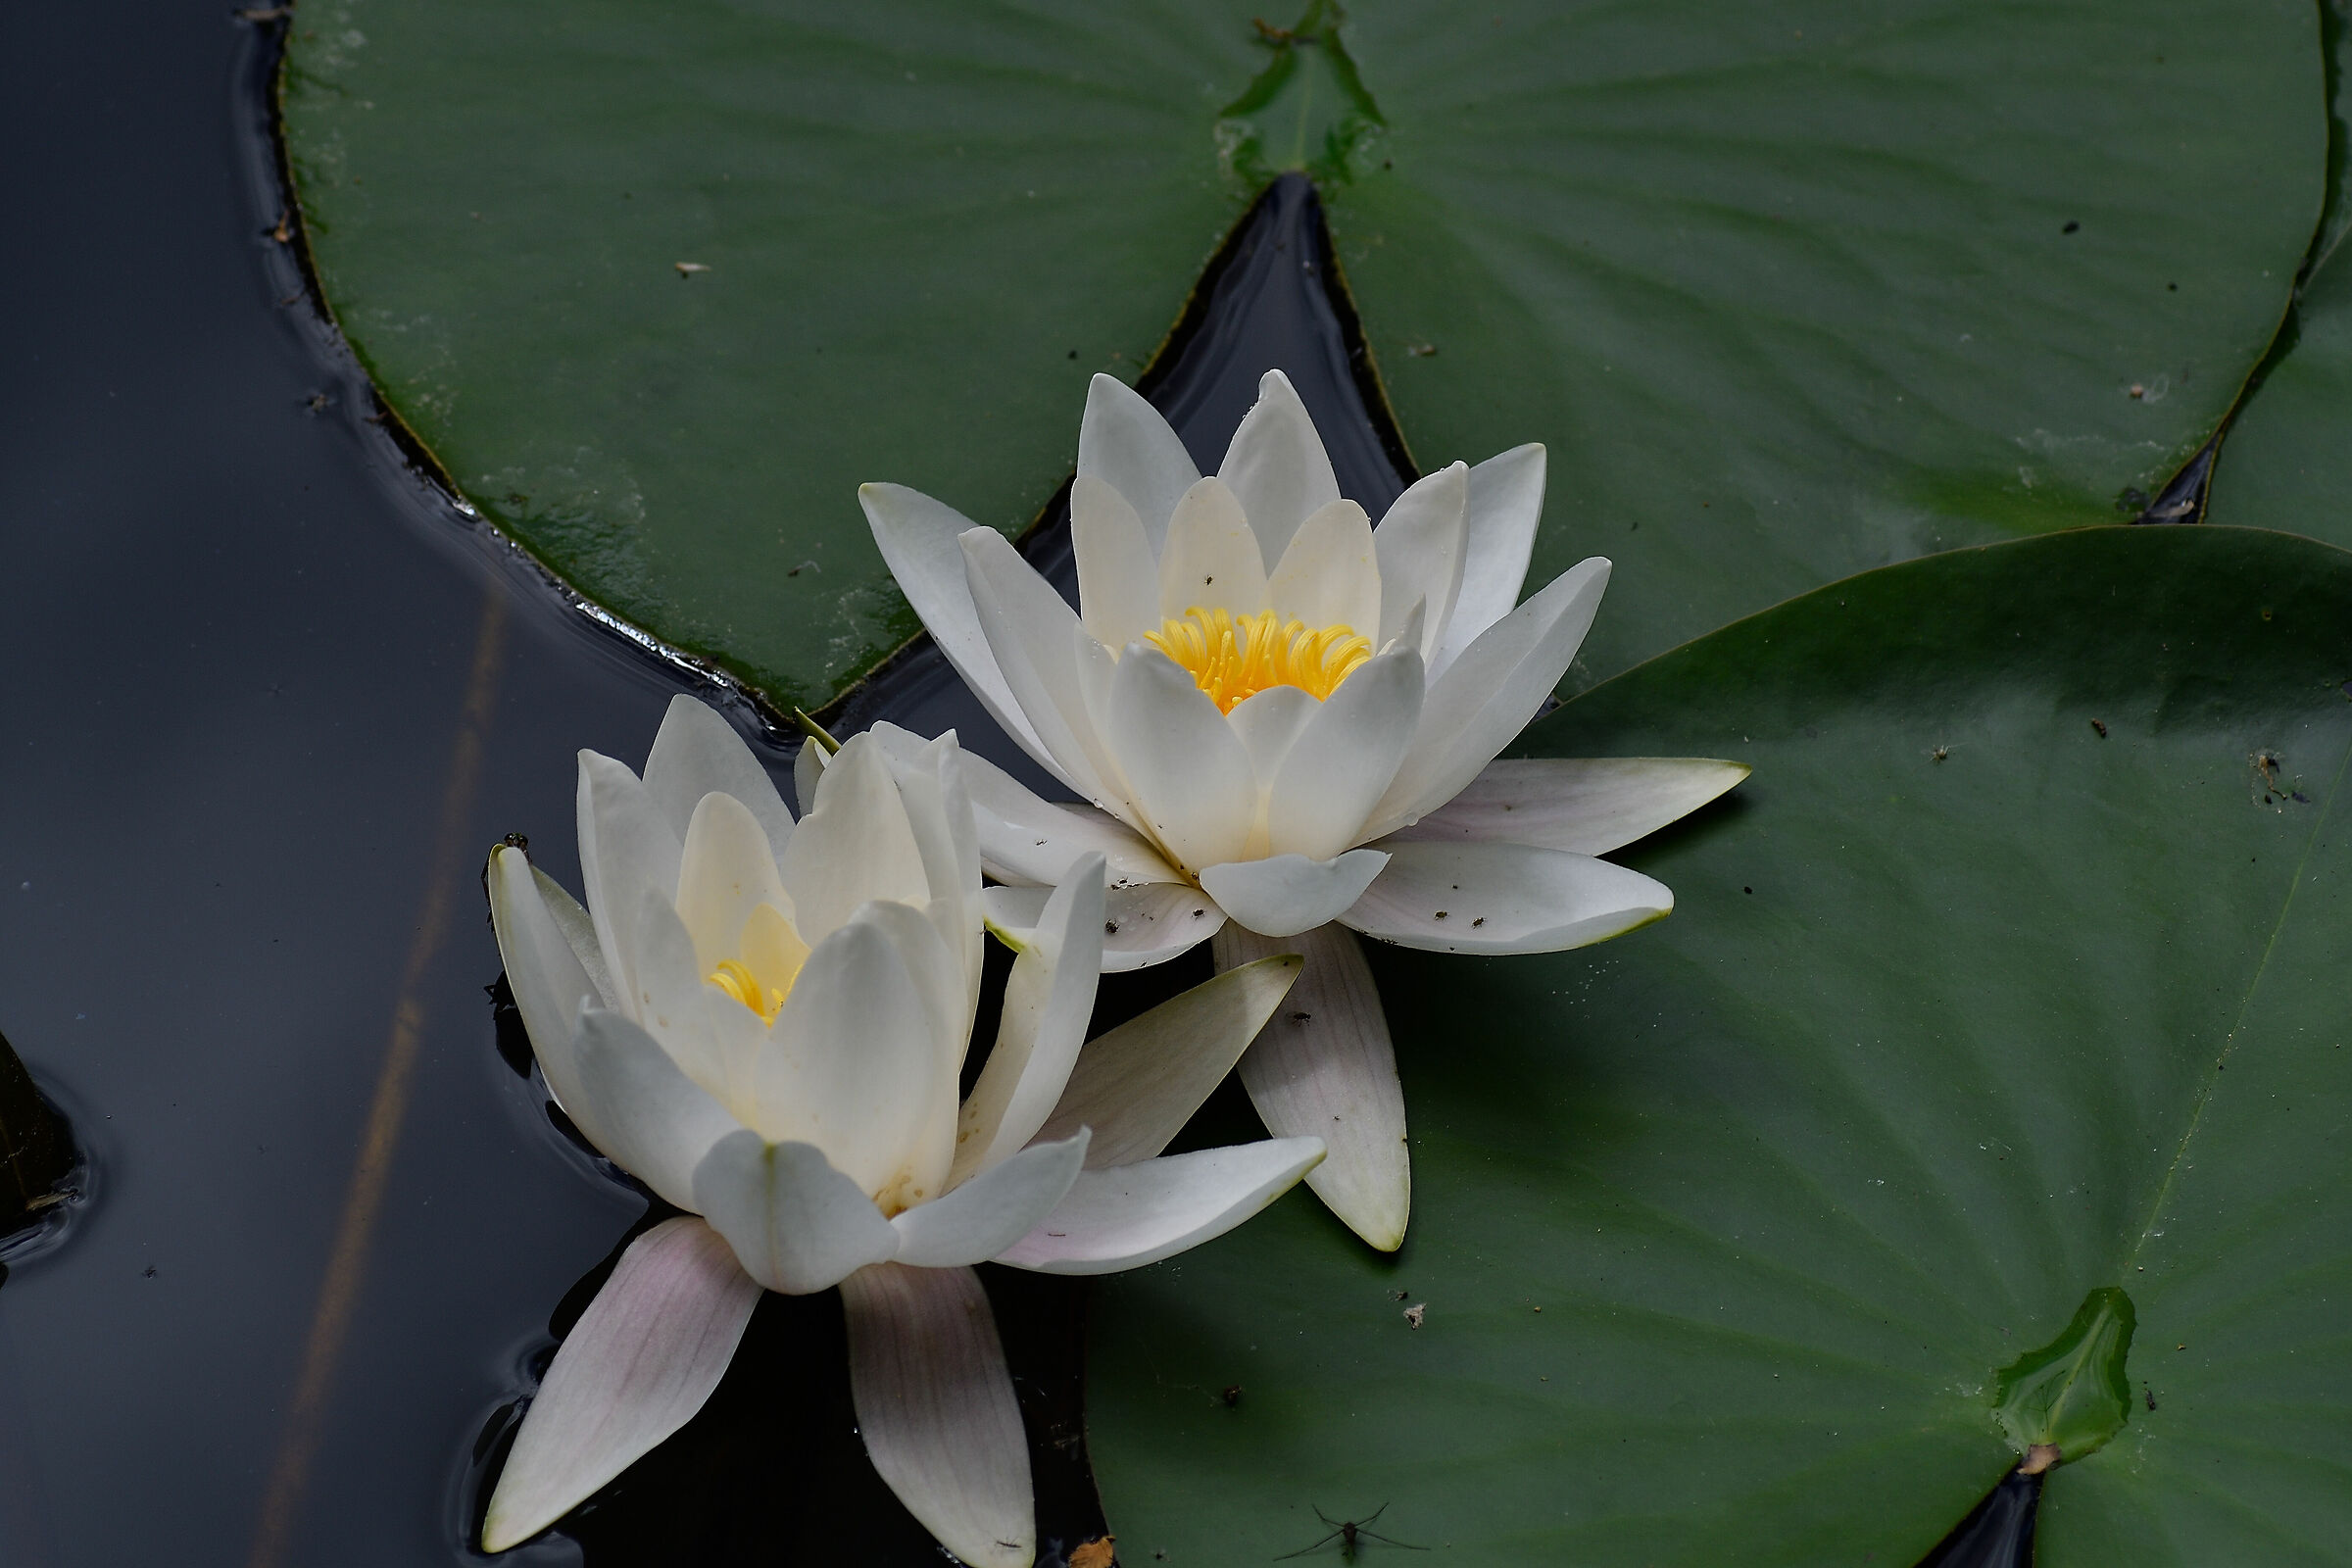 Water lilies with guests...